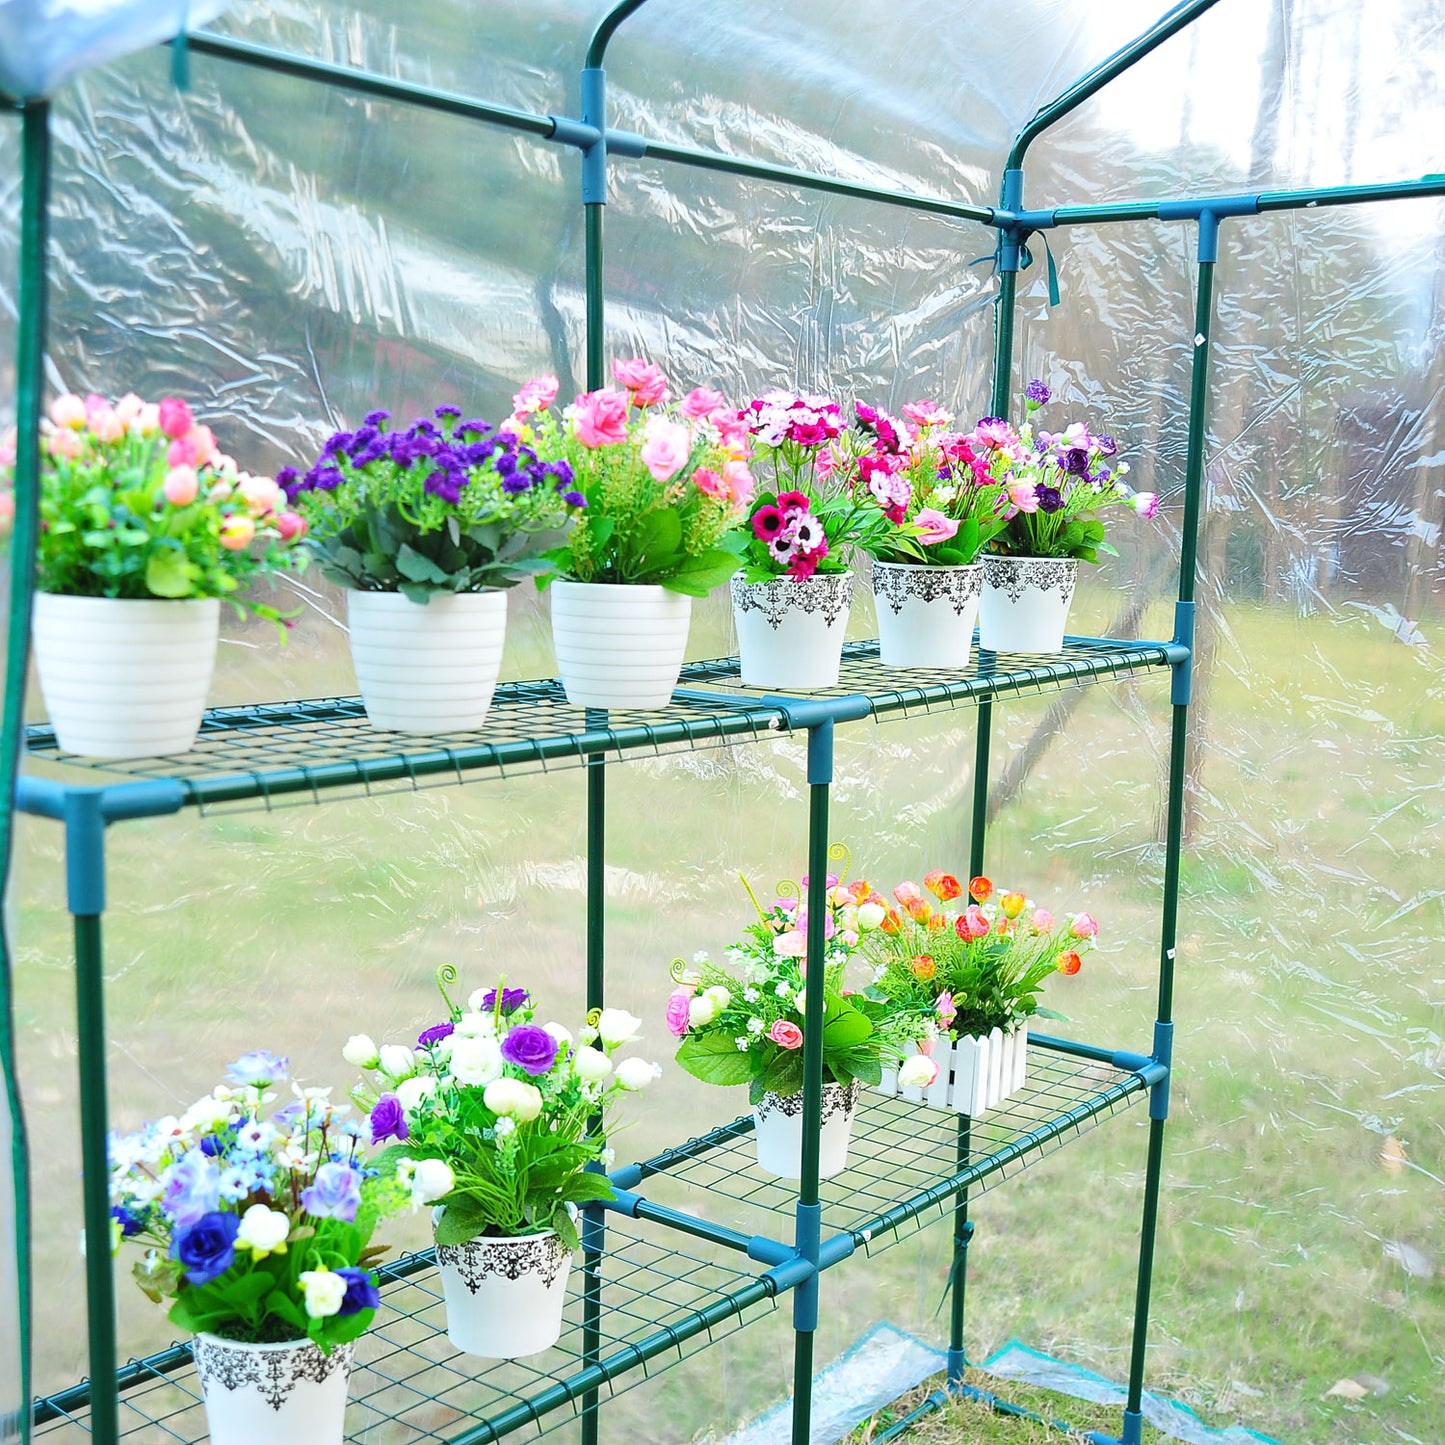 Outsunny 1.43Lx1.43Wx1.95H m Steel Frame Greenhouse, 2 Shelves-Deep Green